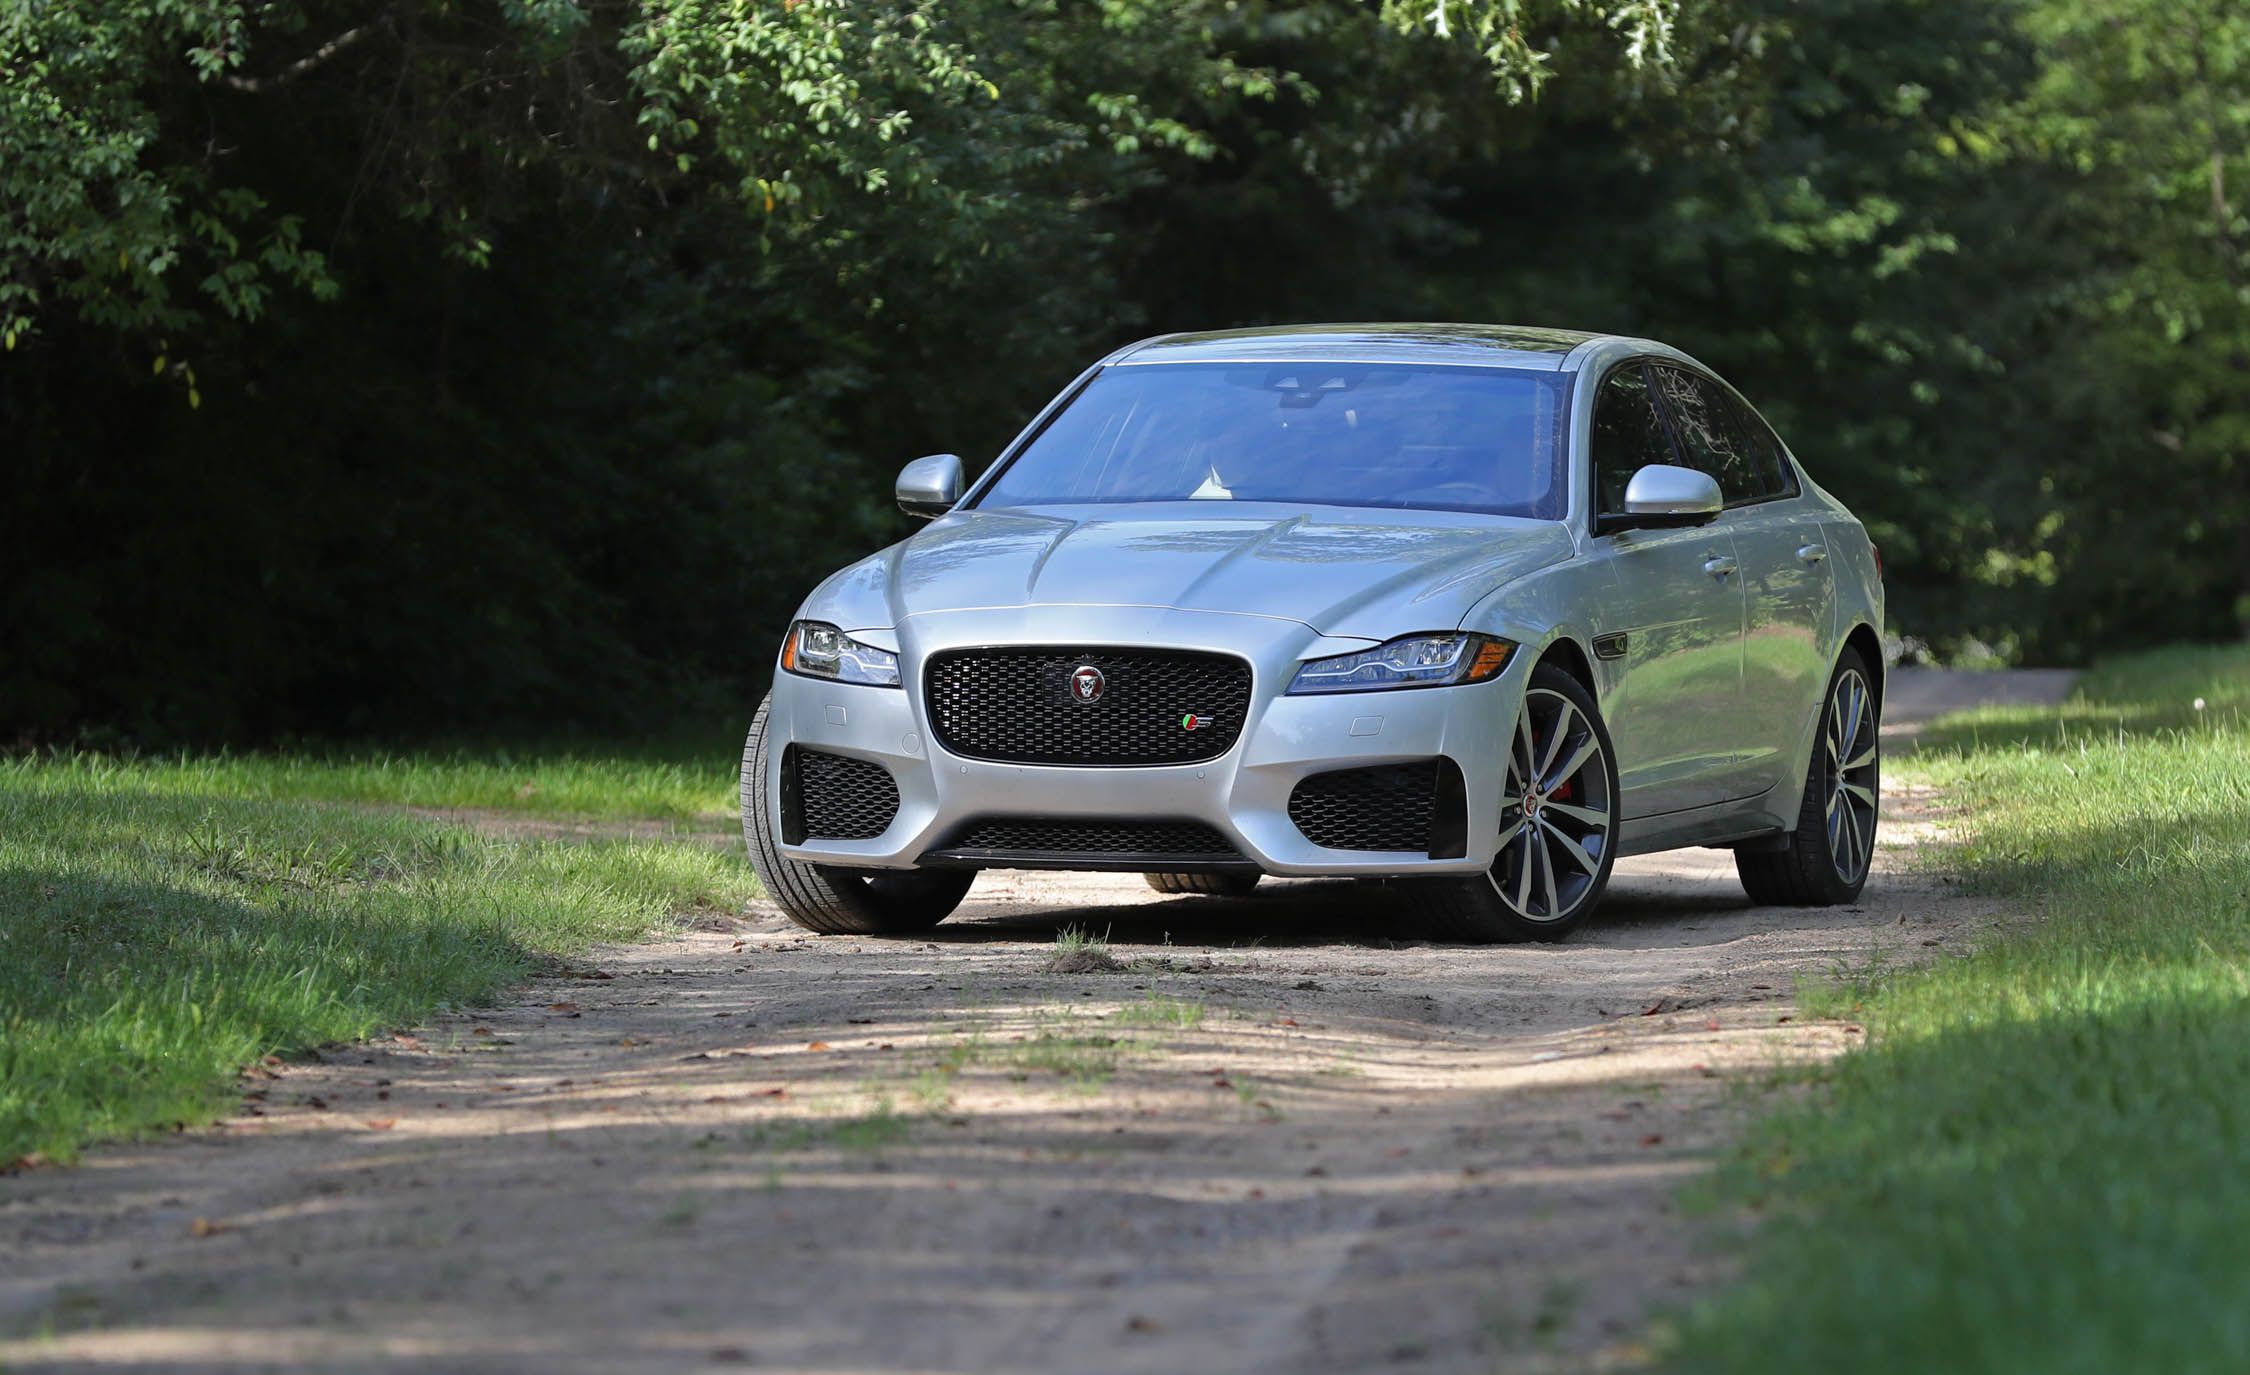 2020 Jaguar XF Overview  What's New With the Facelifted Jaguar XF?